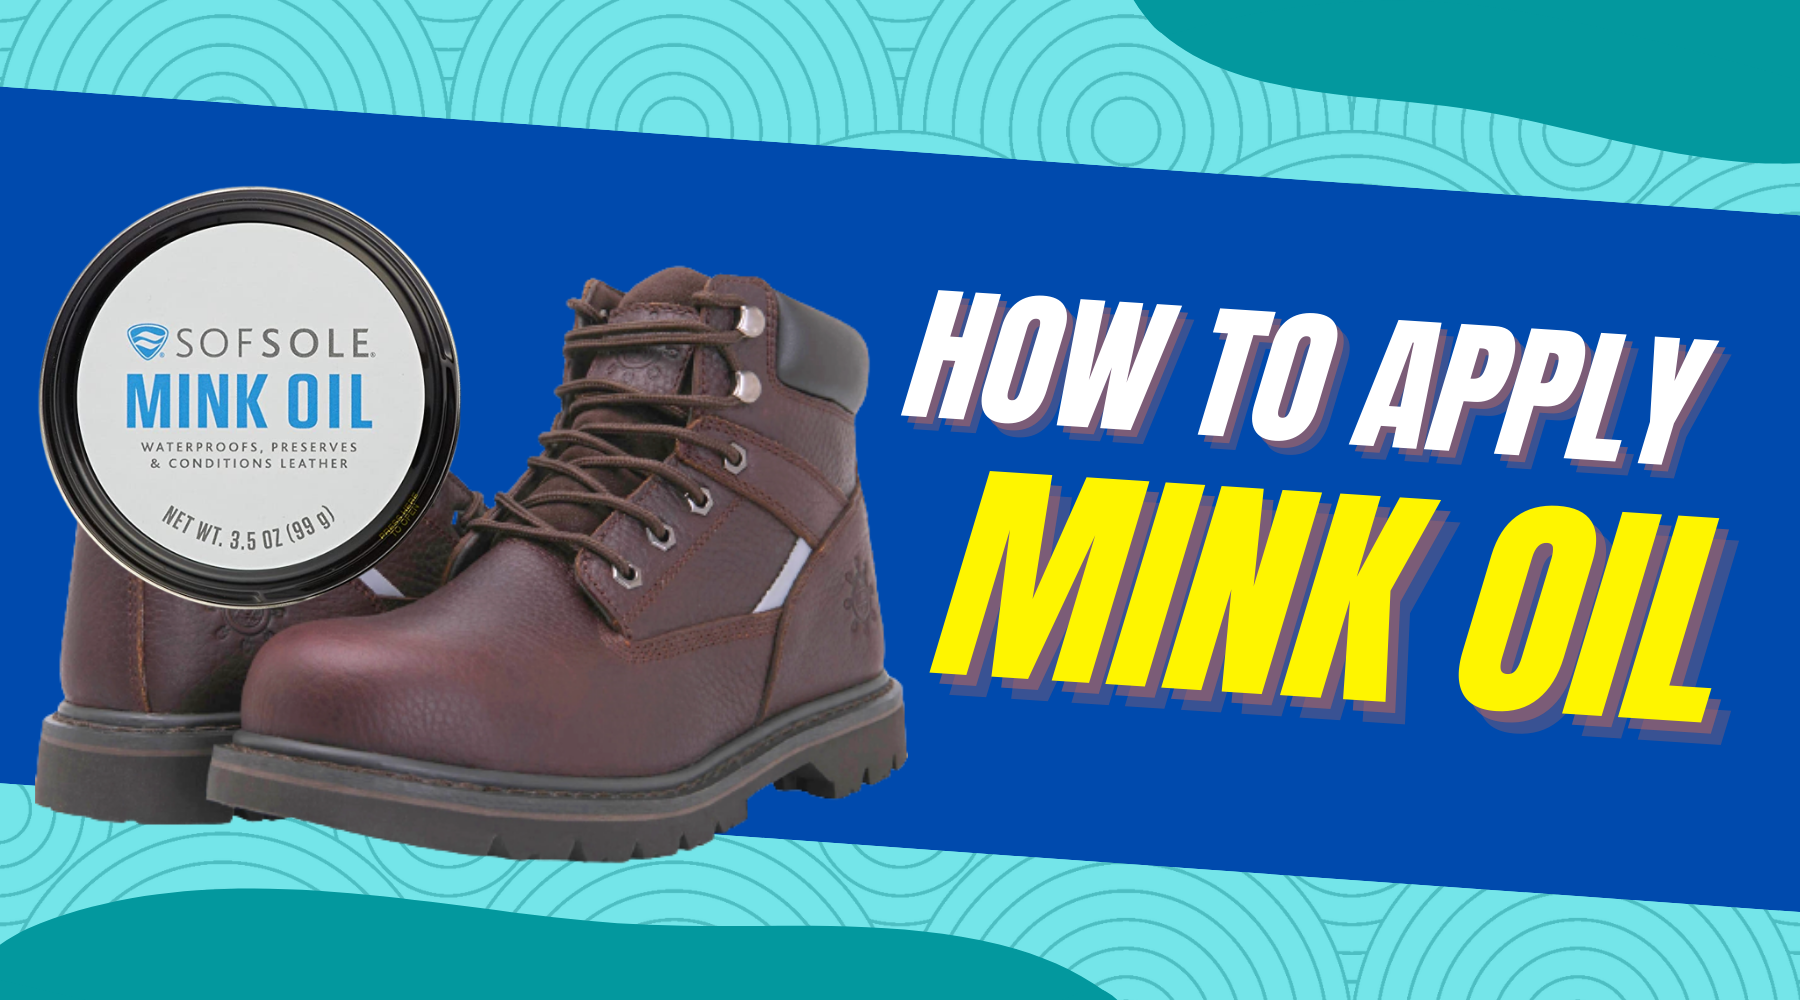 How To Apply Mink Oil To Boots Properly